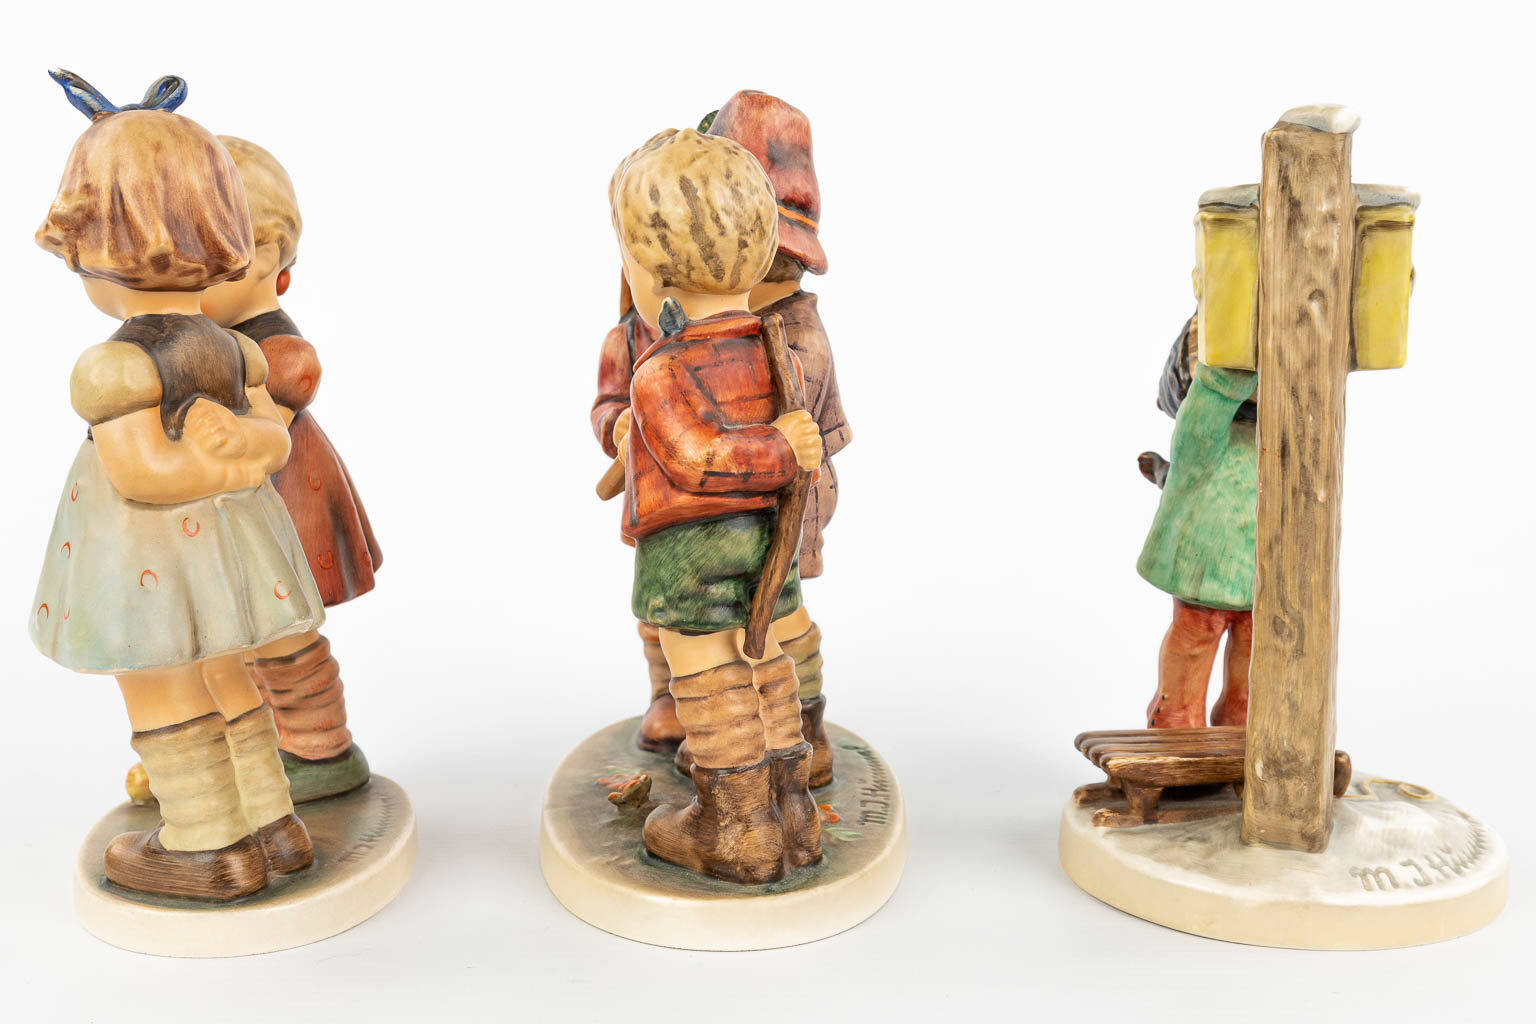 A collection of 3 statues made by Hummel. (H:19cm)